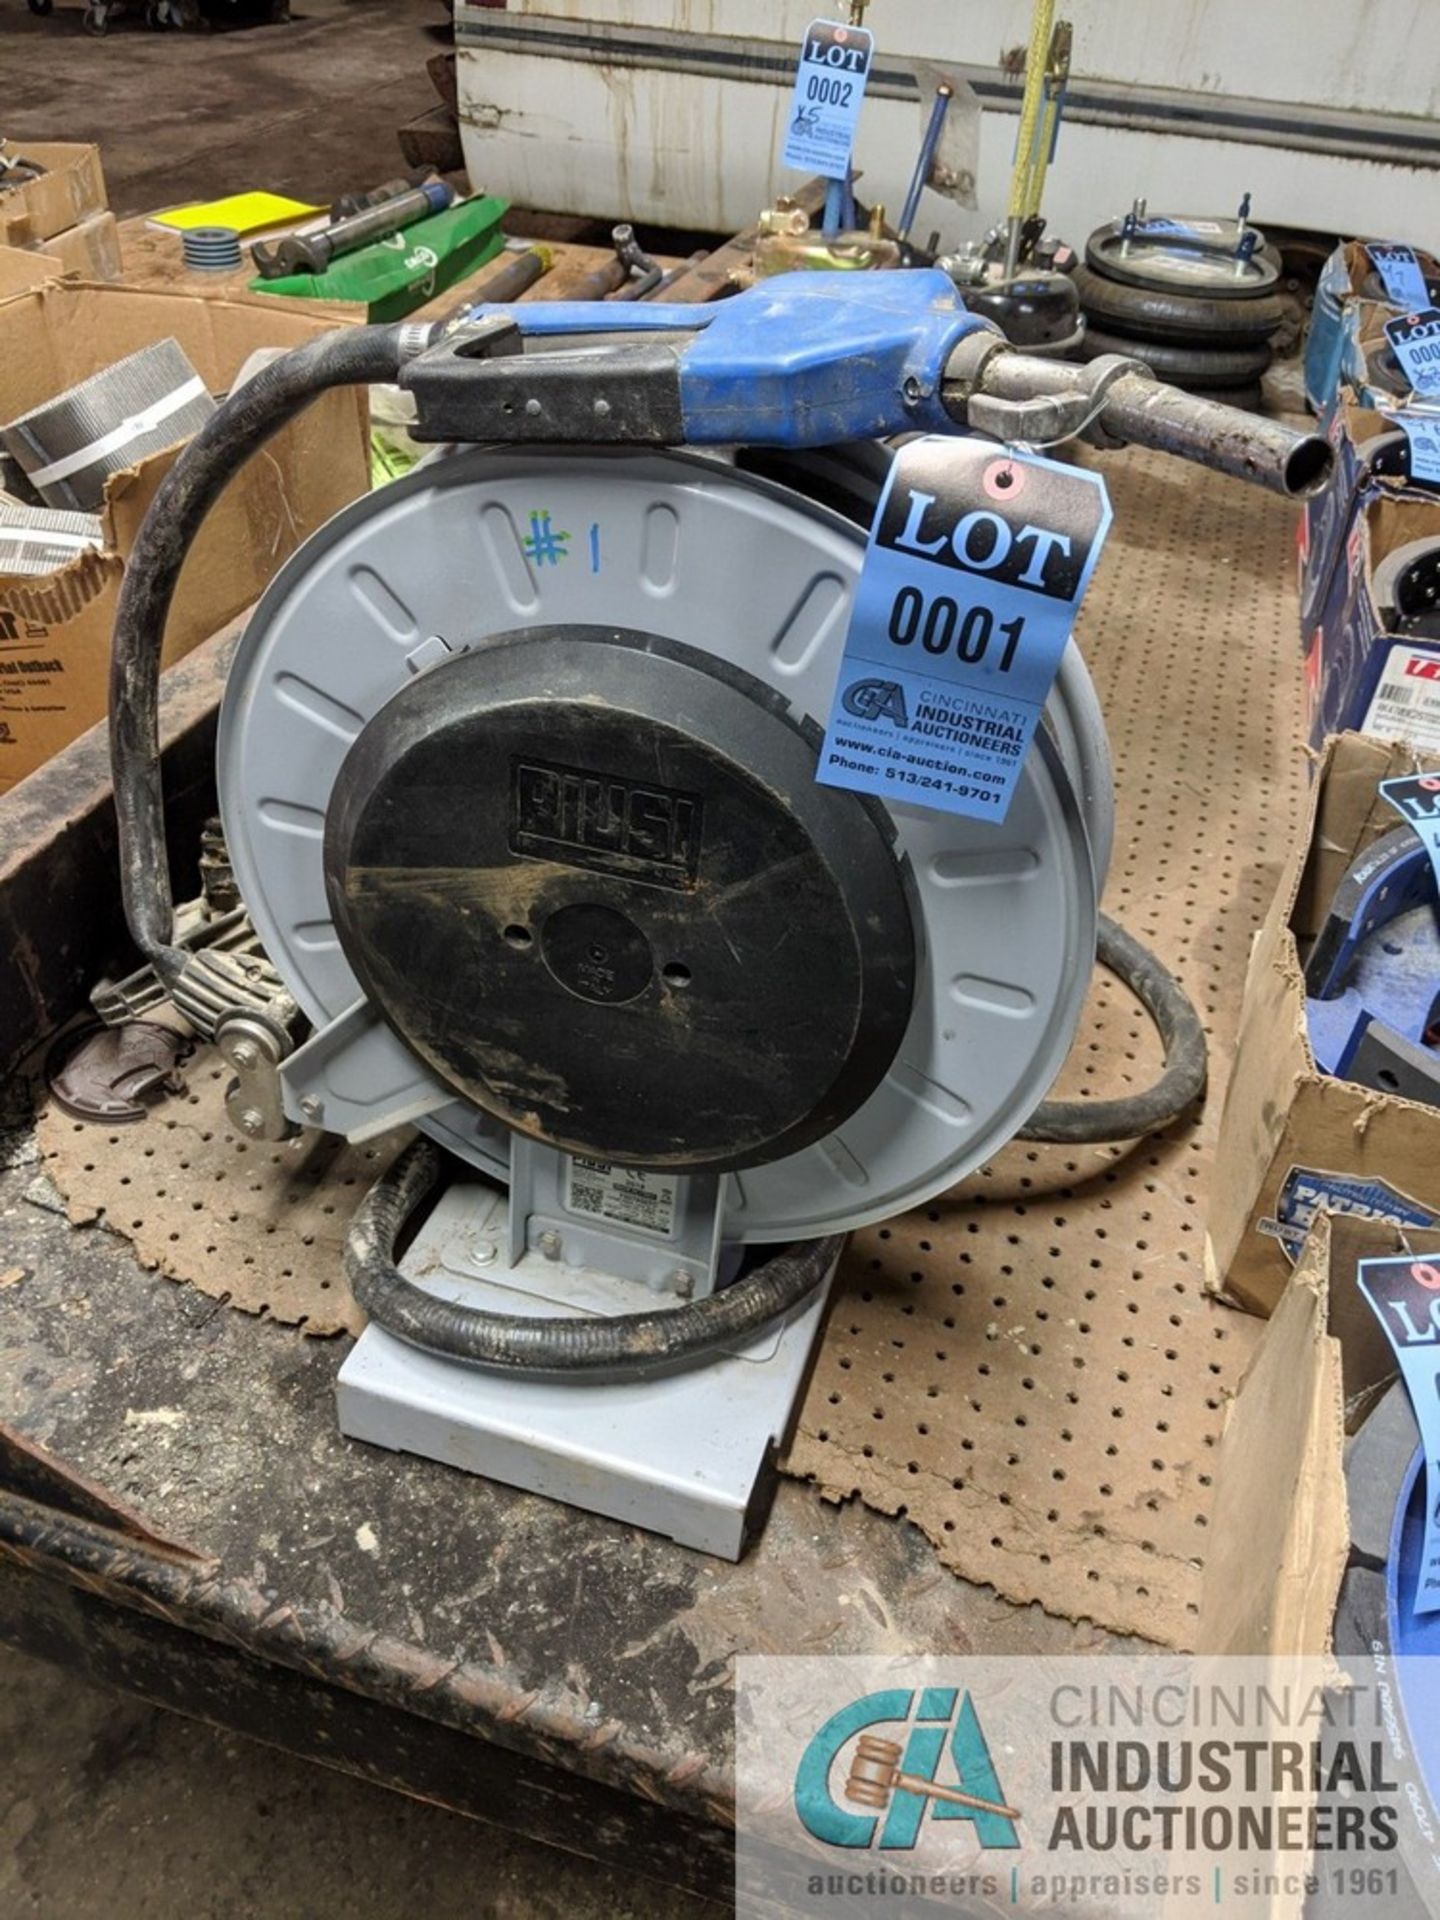 FUEL HOSE ON REEL WITH AMOR BLUE ELECTRIC PUMP **LOCATED AT 128 STEUBENVILLE AVE., CAMBRIDGE, OHIO